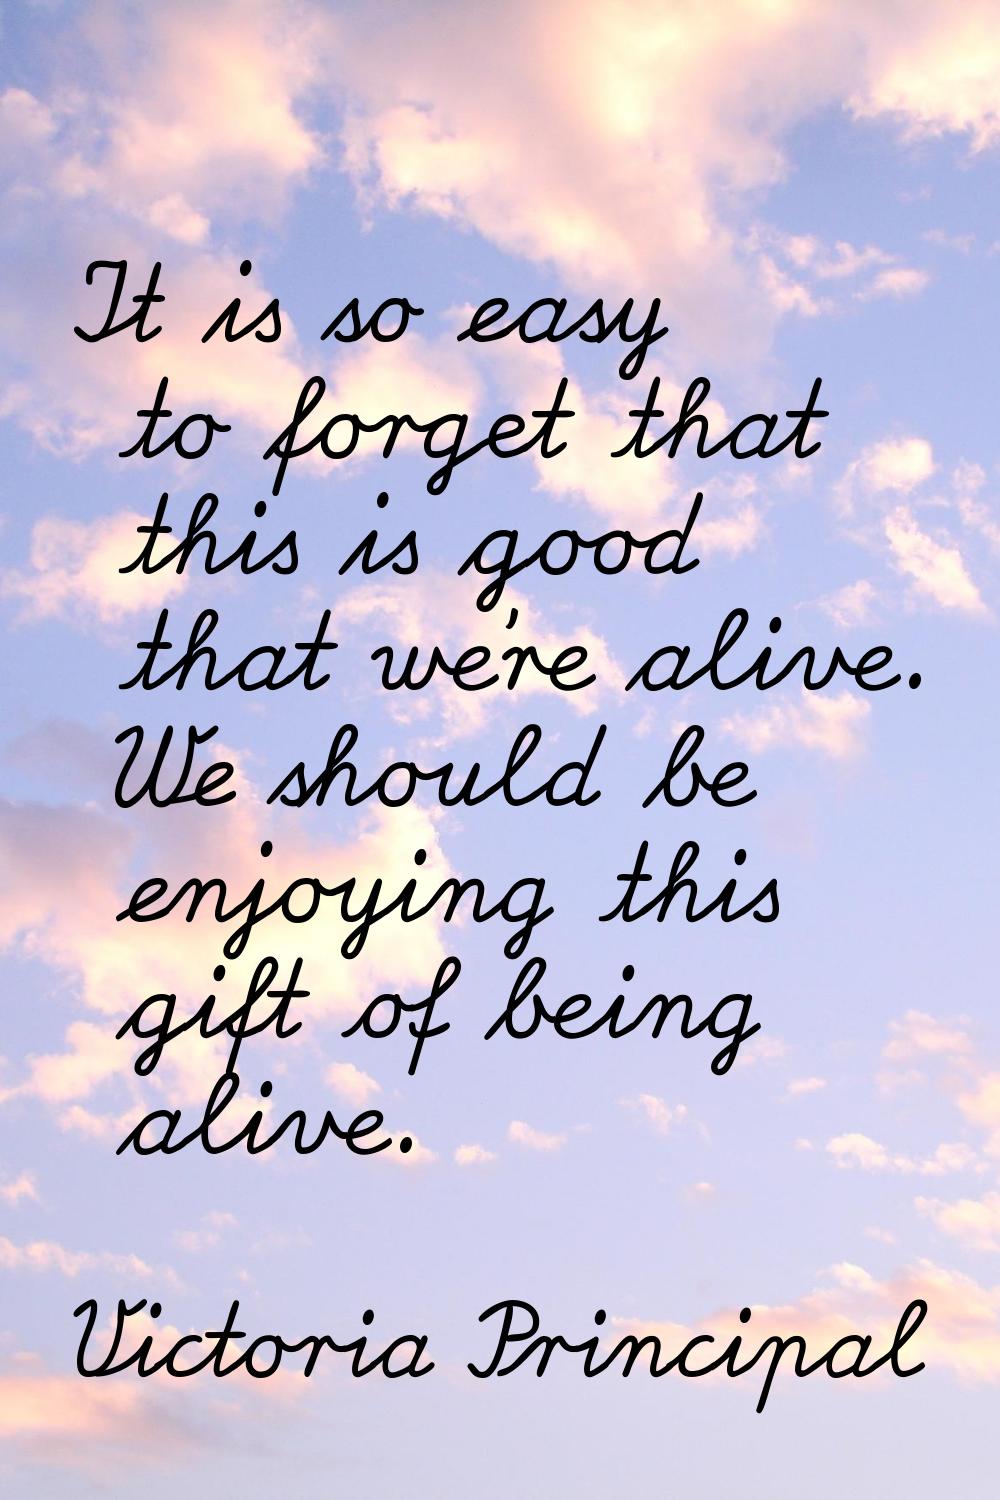 It is so easy to forget that this is good that we're alive. We should be enjoying this gift of bein